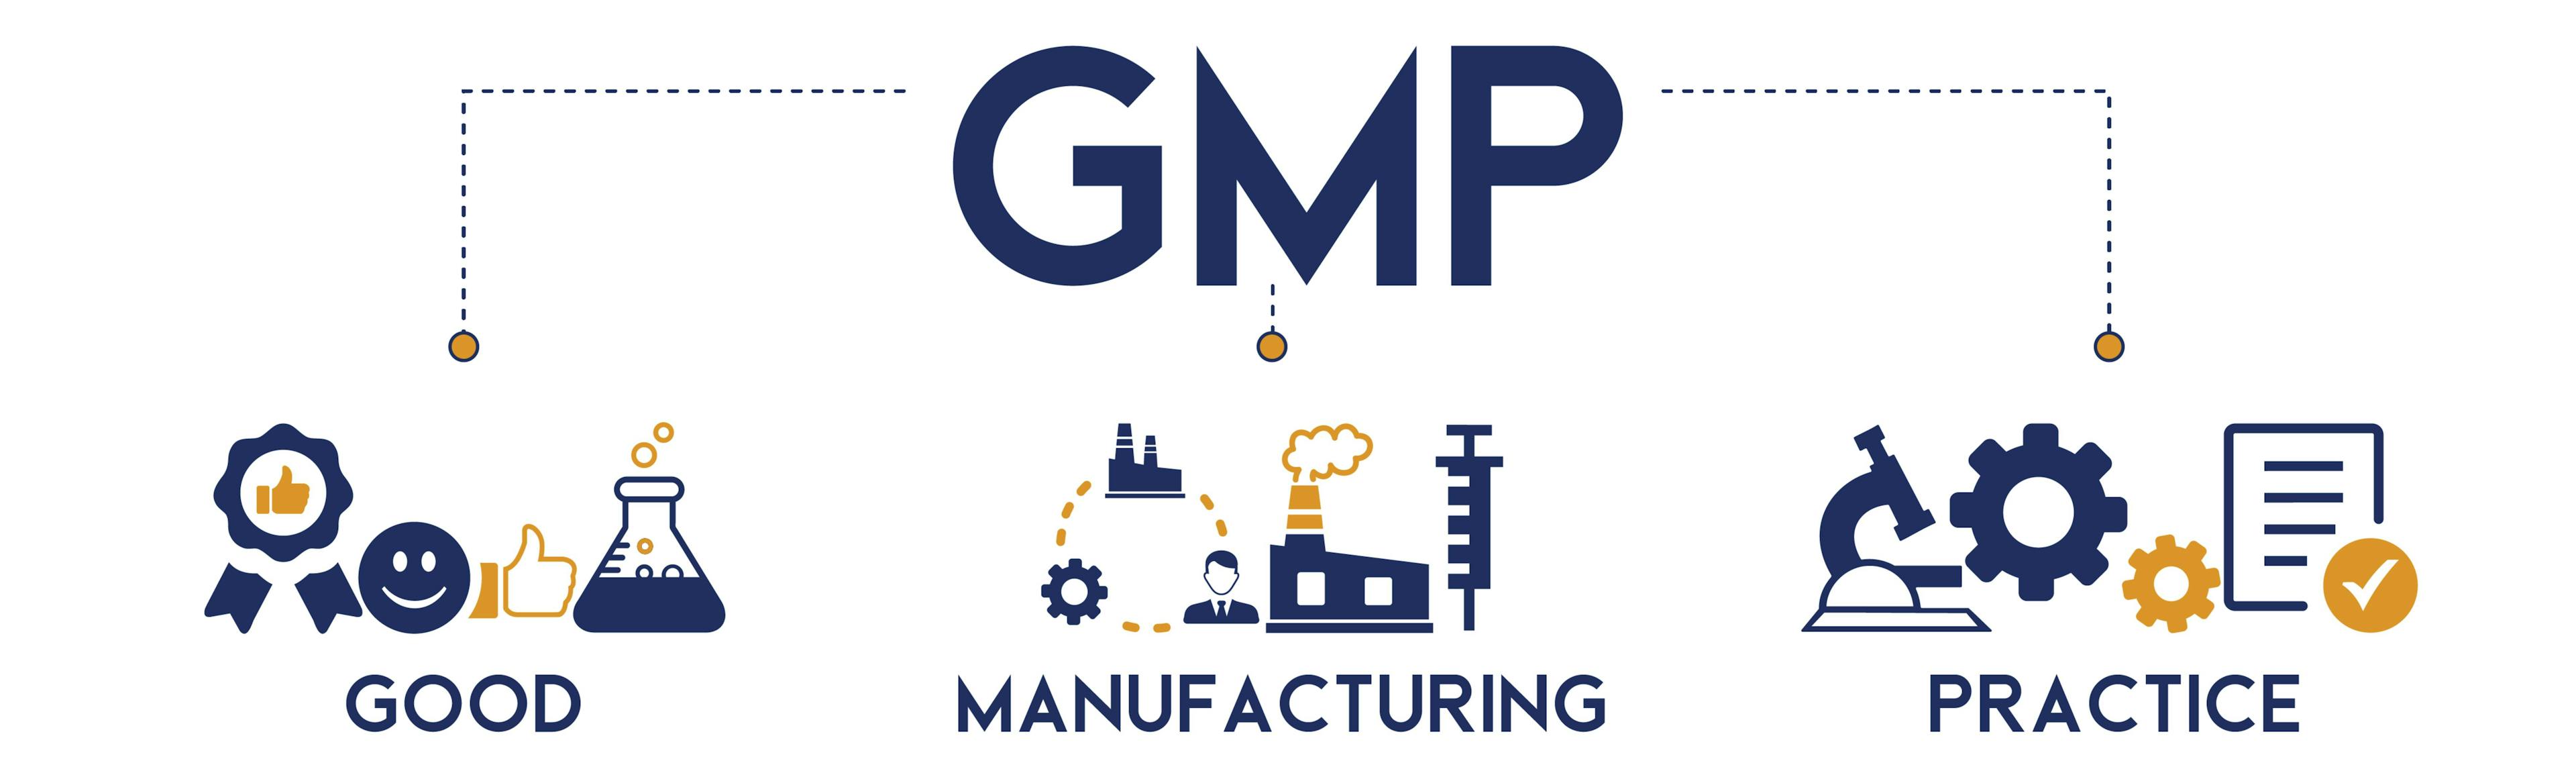 GMP banner website icons vector illustration concept of good manufacturing practice with an icons of standard, assurance, quality, product, process, factory, management, safety on white background | Image Credit: © Icon-Duck - stock.adobe.come